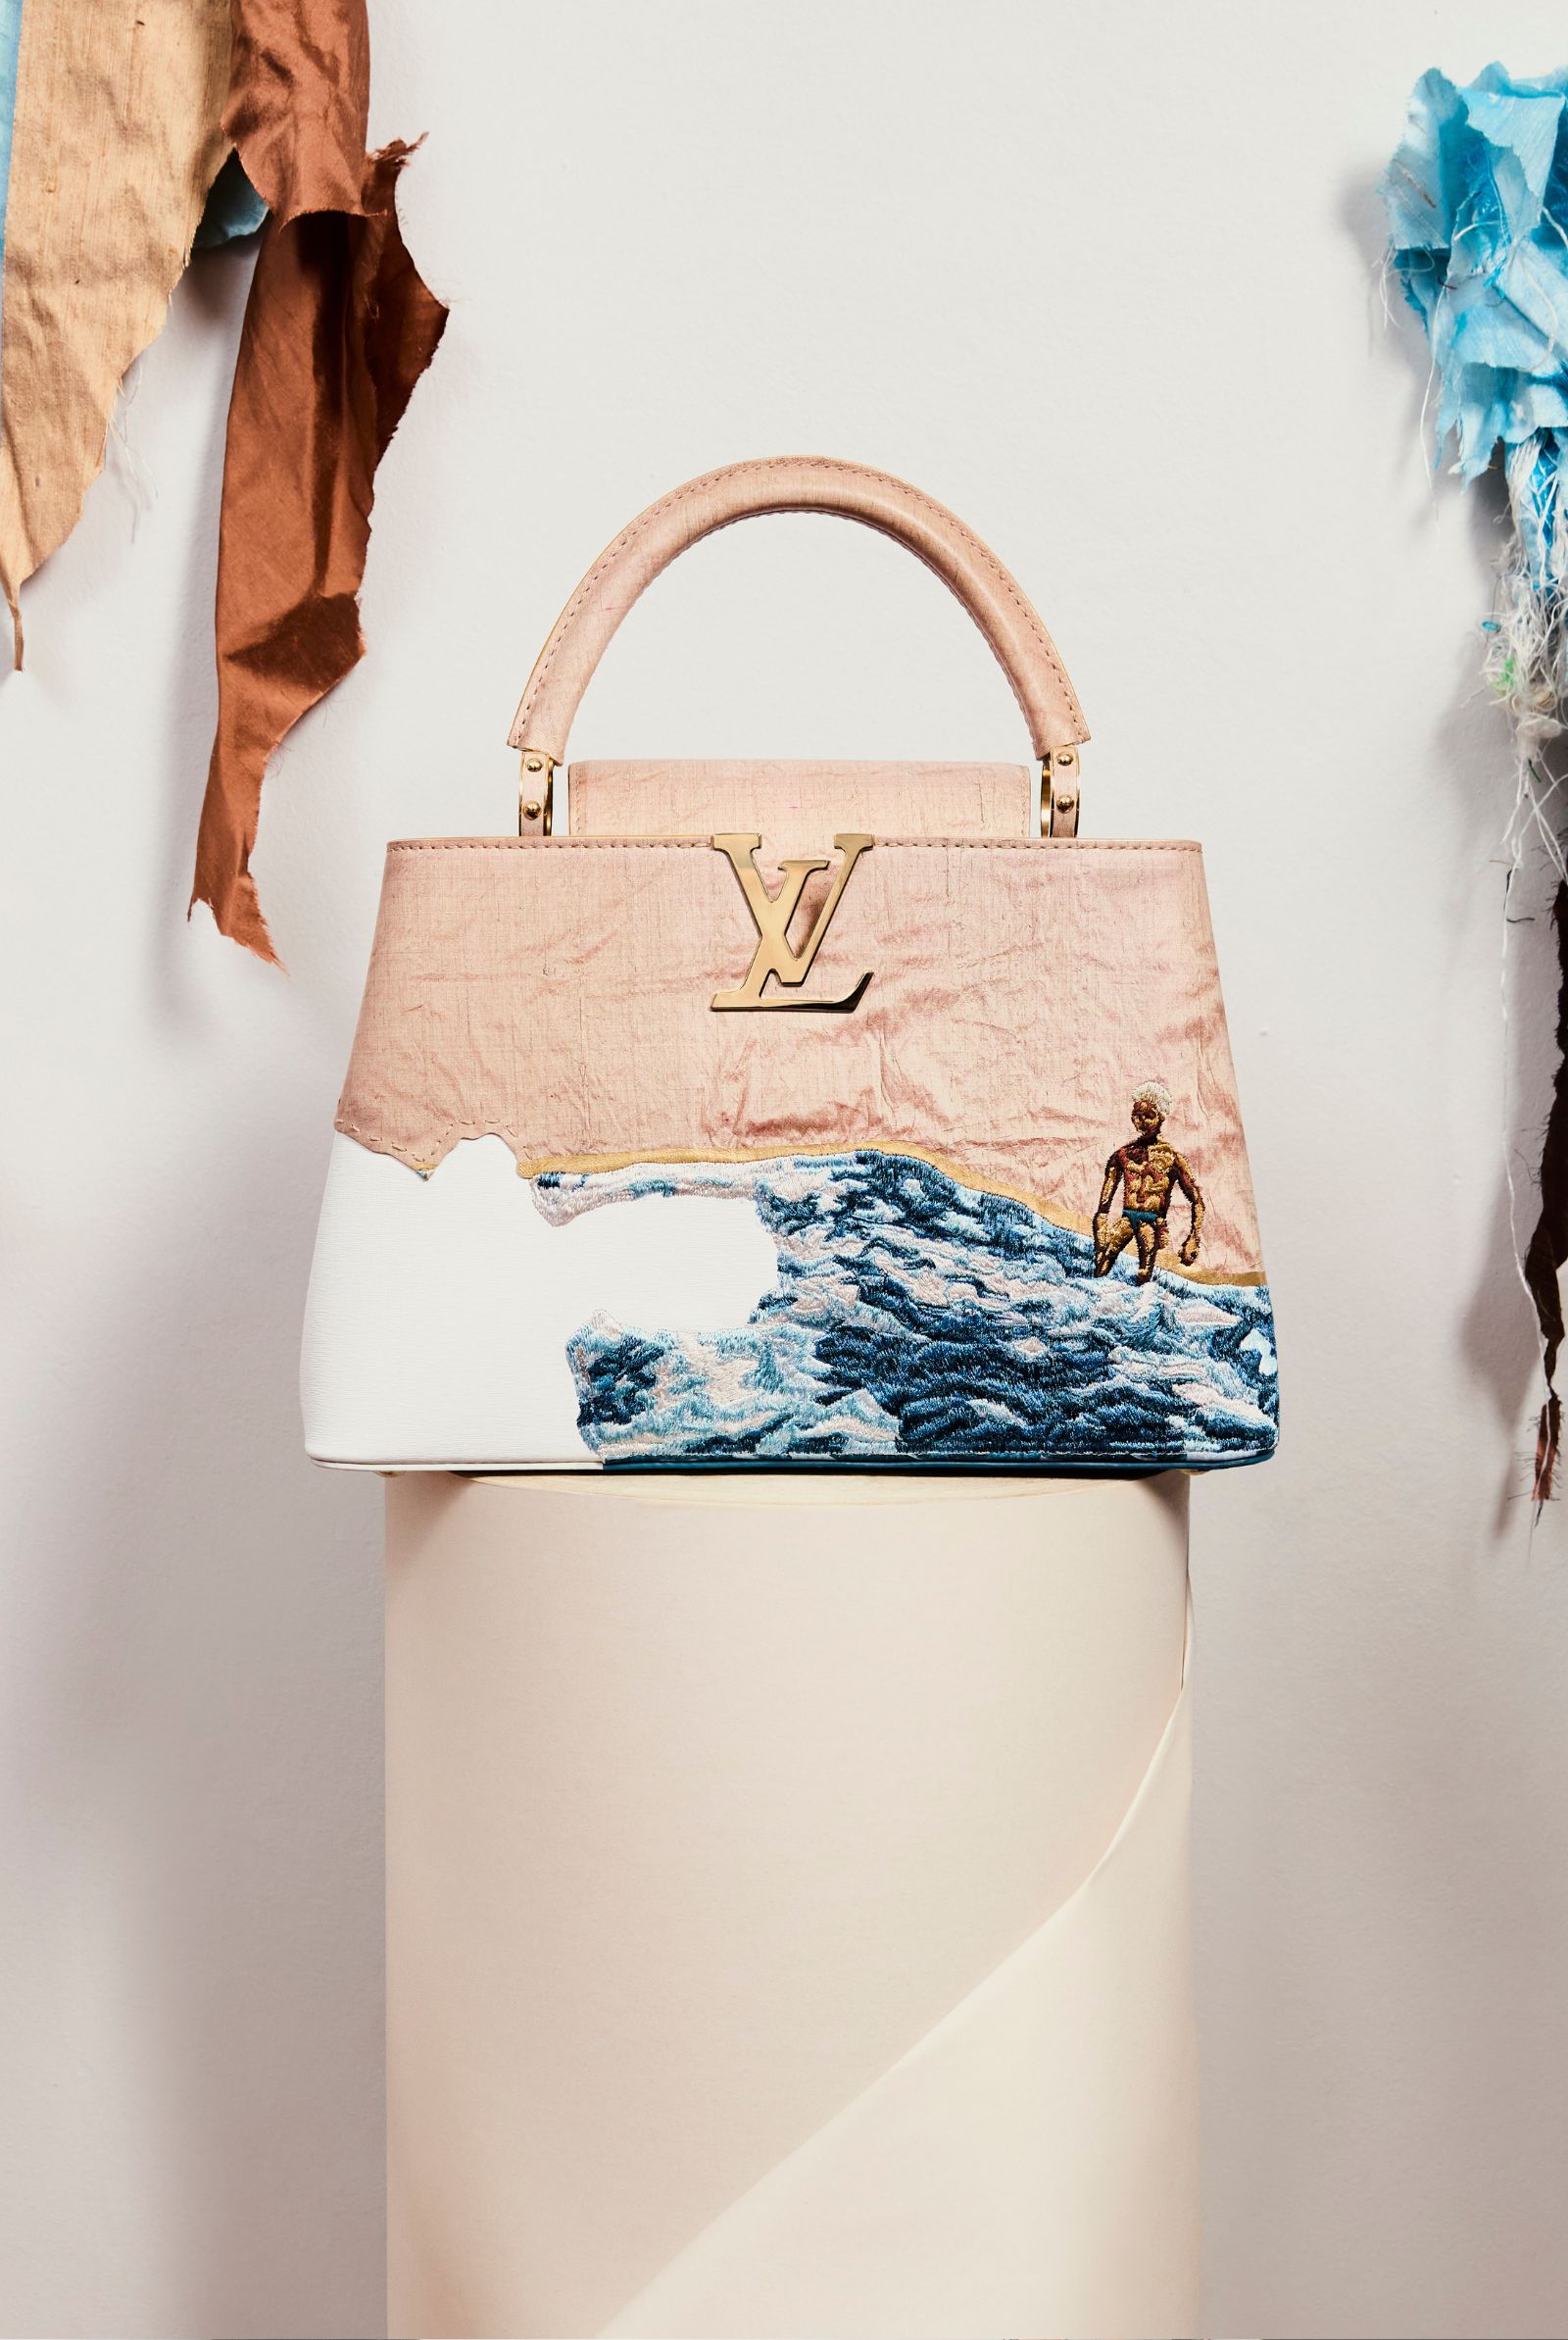 Louis Vuitton's New Artycapucines Collection Is A Celebration Of